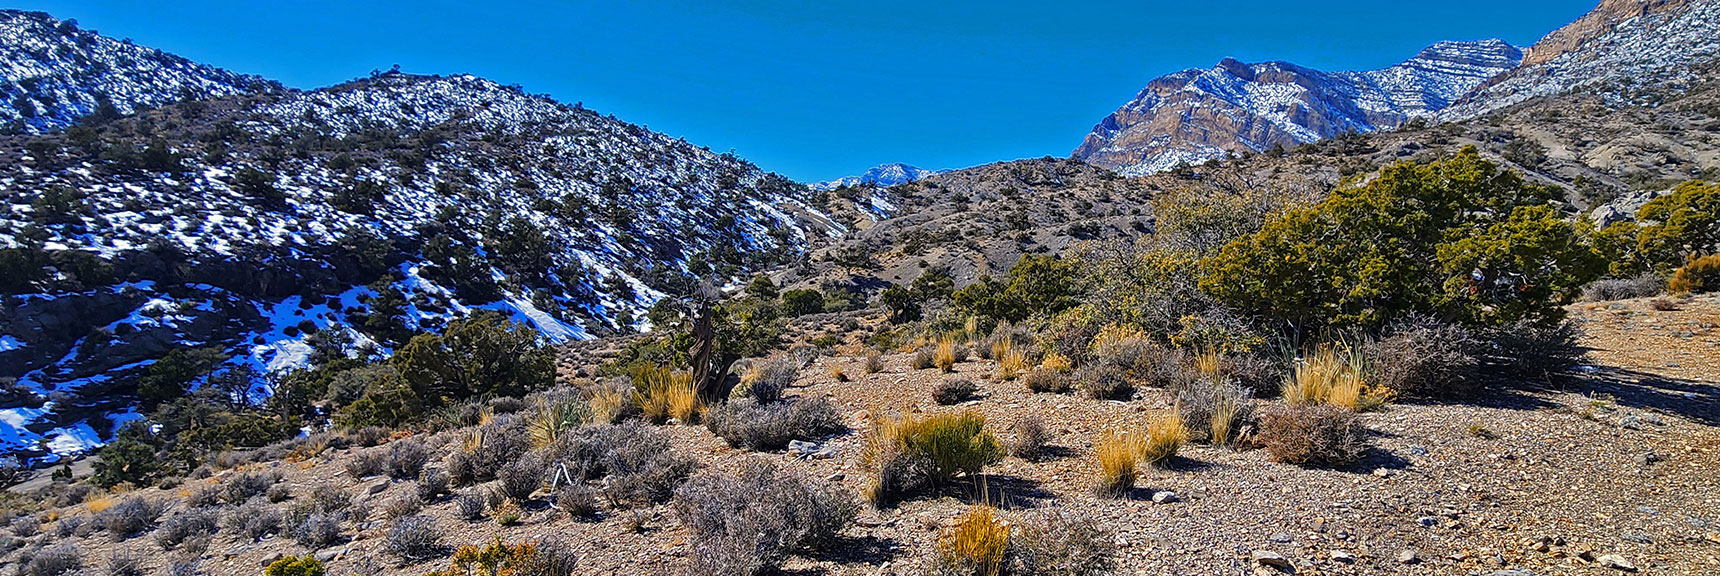 Note Wash Below Ascending Toward Saddle. This is Limestone Trail to Red Rock Canyon | Brownstone Trail | Calico Basin | Brownstone Basin | La Madre Mountains Wilderness, Nevada